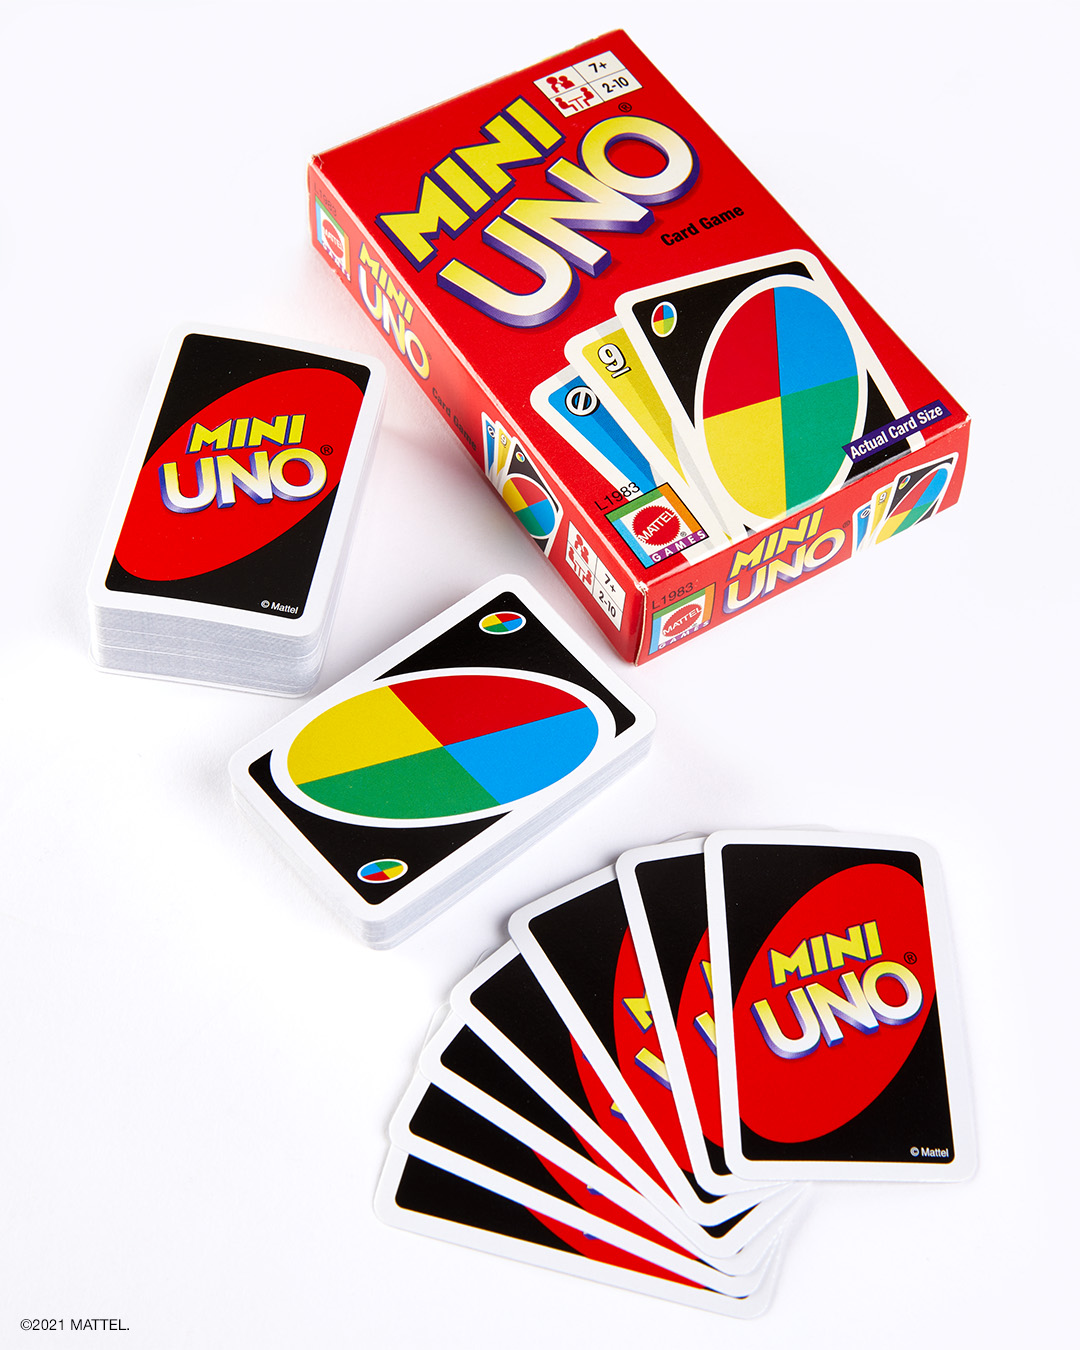 UNO on X: Big moves. Small cards. #tbt to UNO Mini, which first